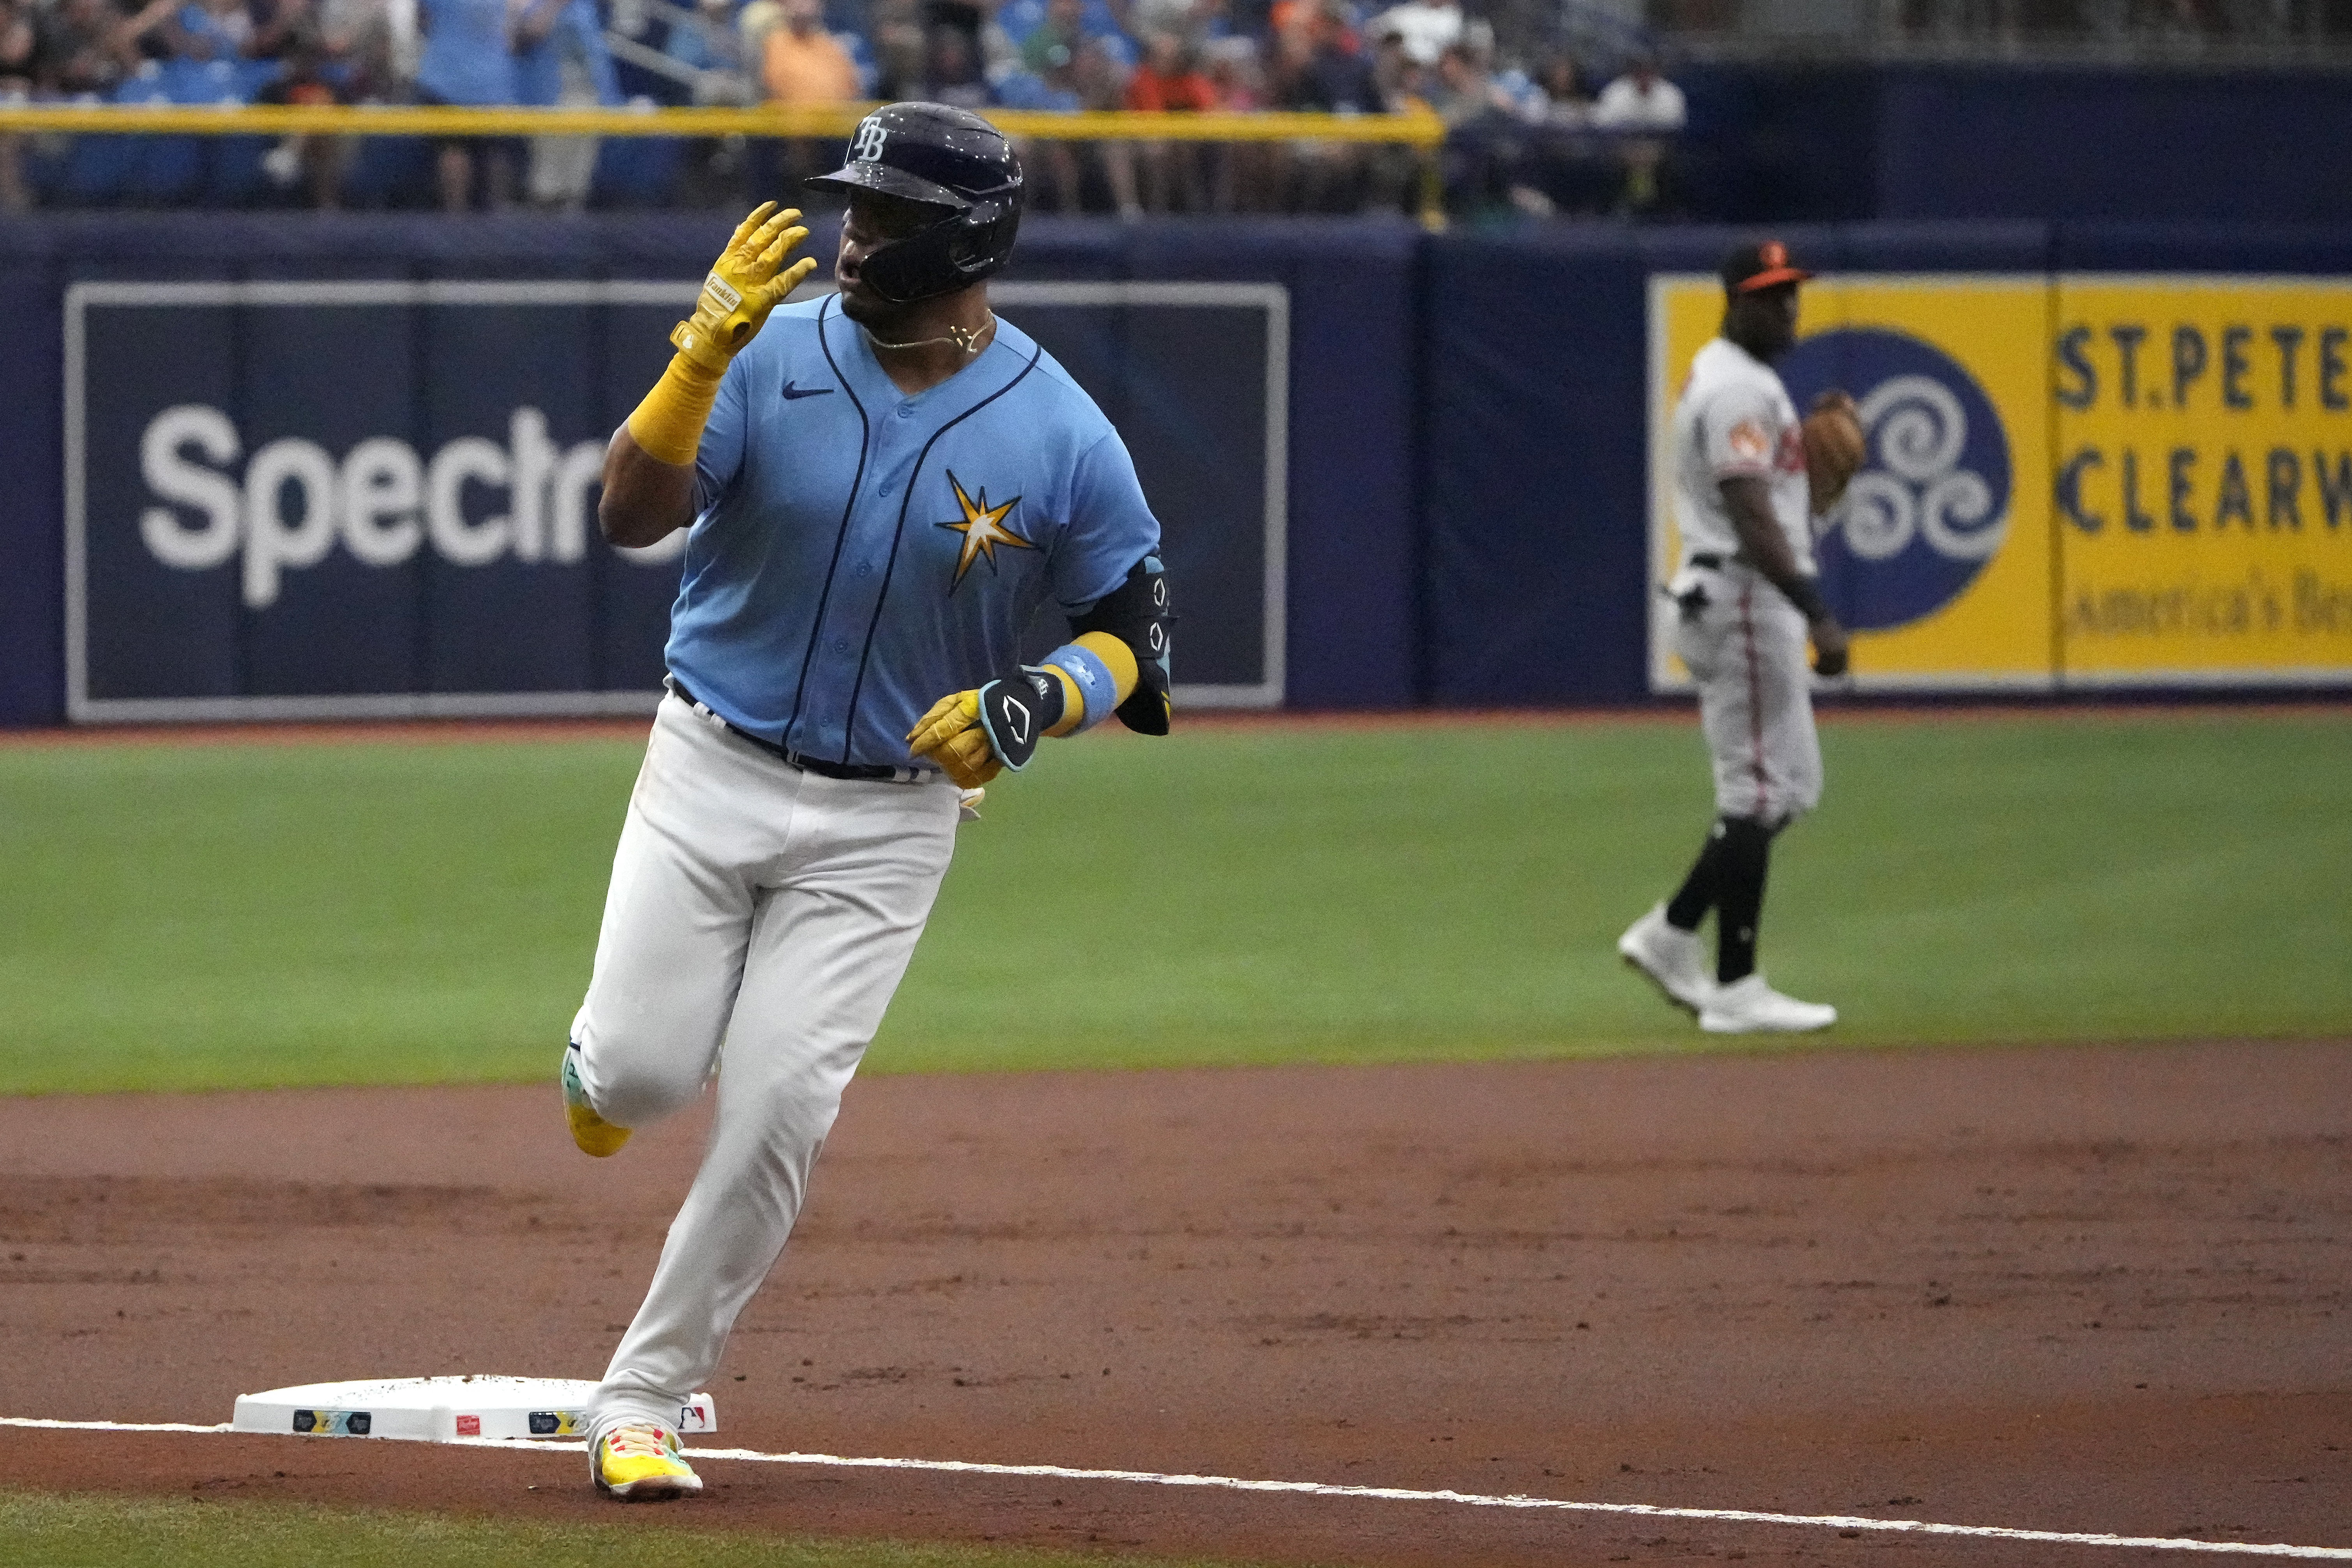 Back-to-back homers power Rays past Orioles